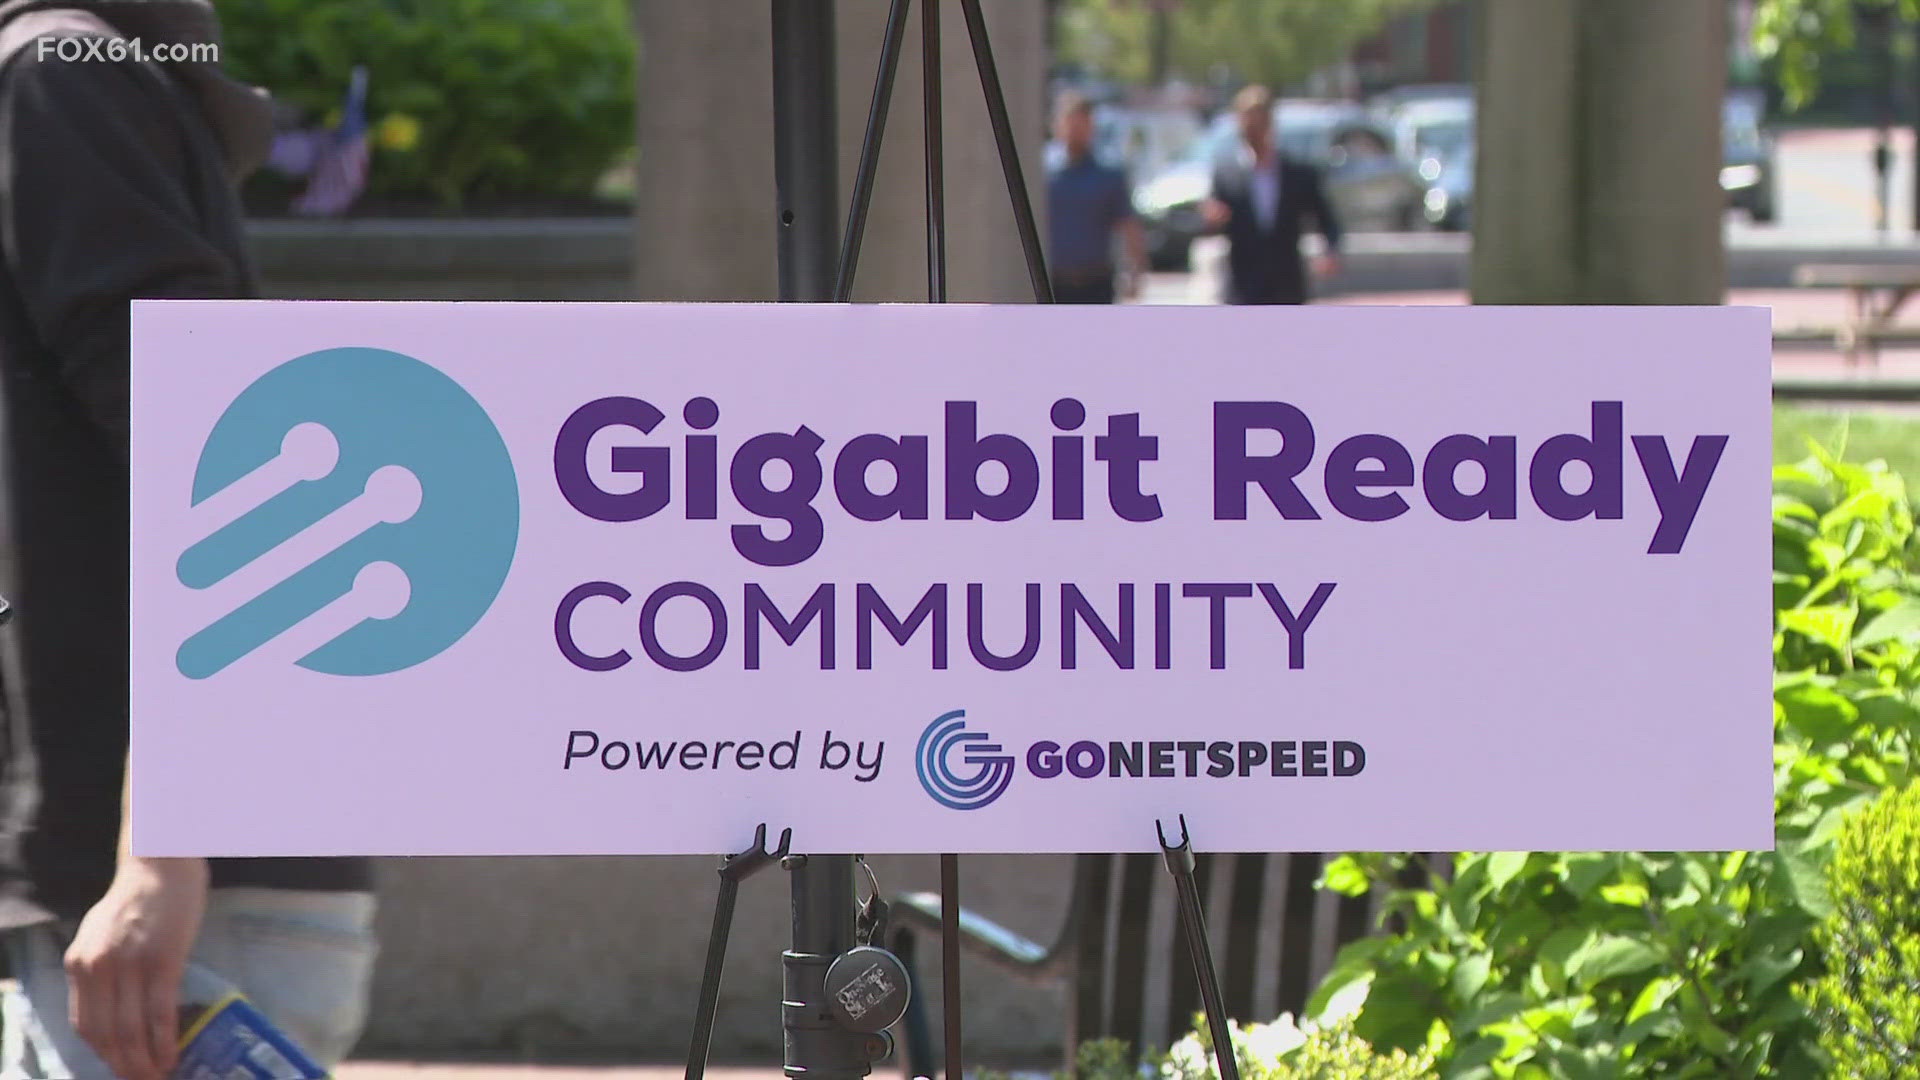 New Britain was given the title of "Gigabit Ready Community" with high-speed fiber internet available to a majority of homes and businesses through GoNetspeed.